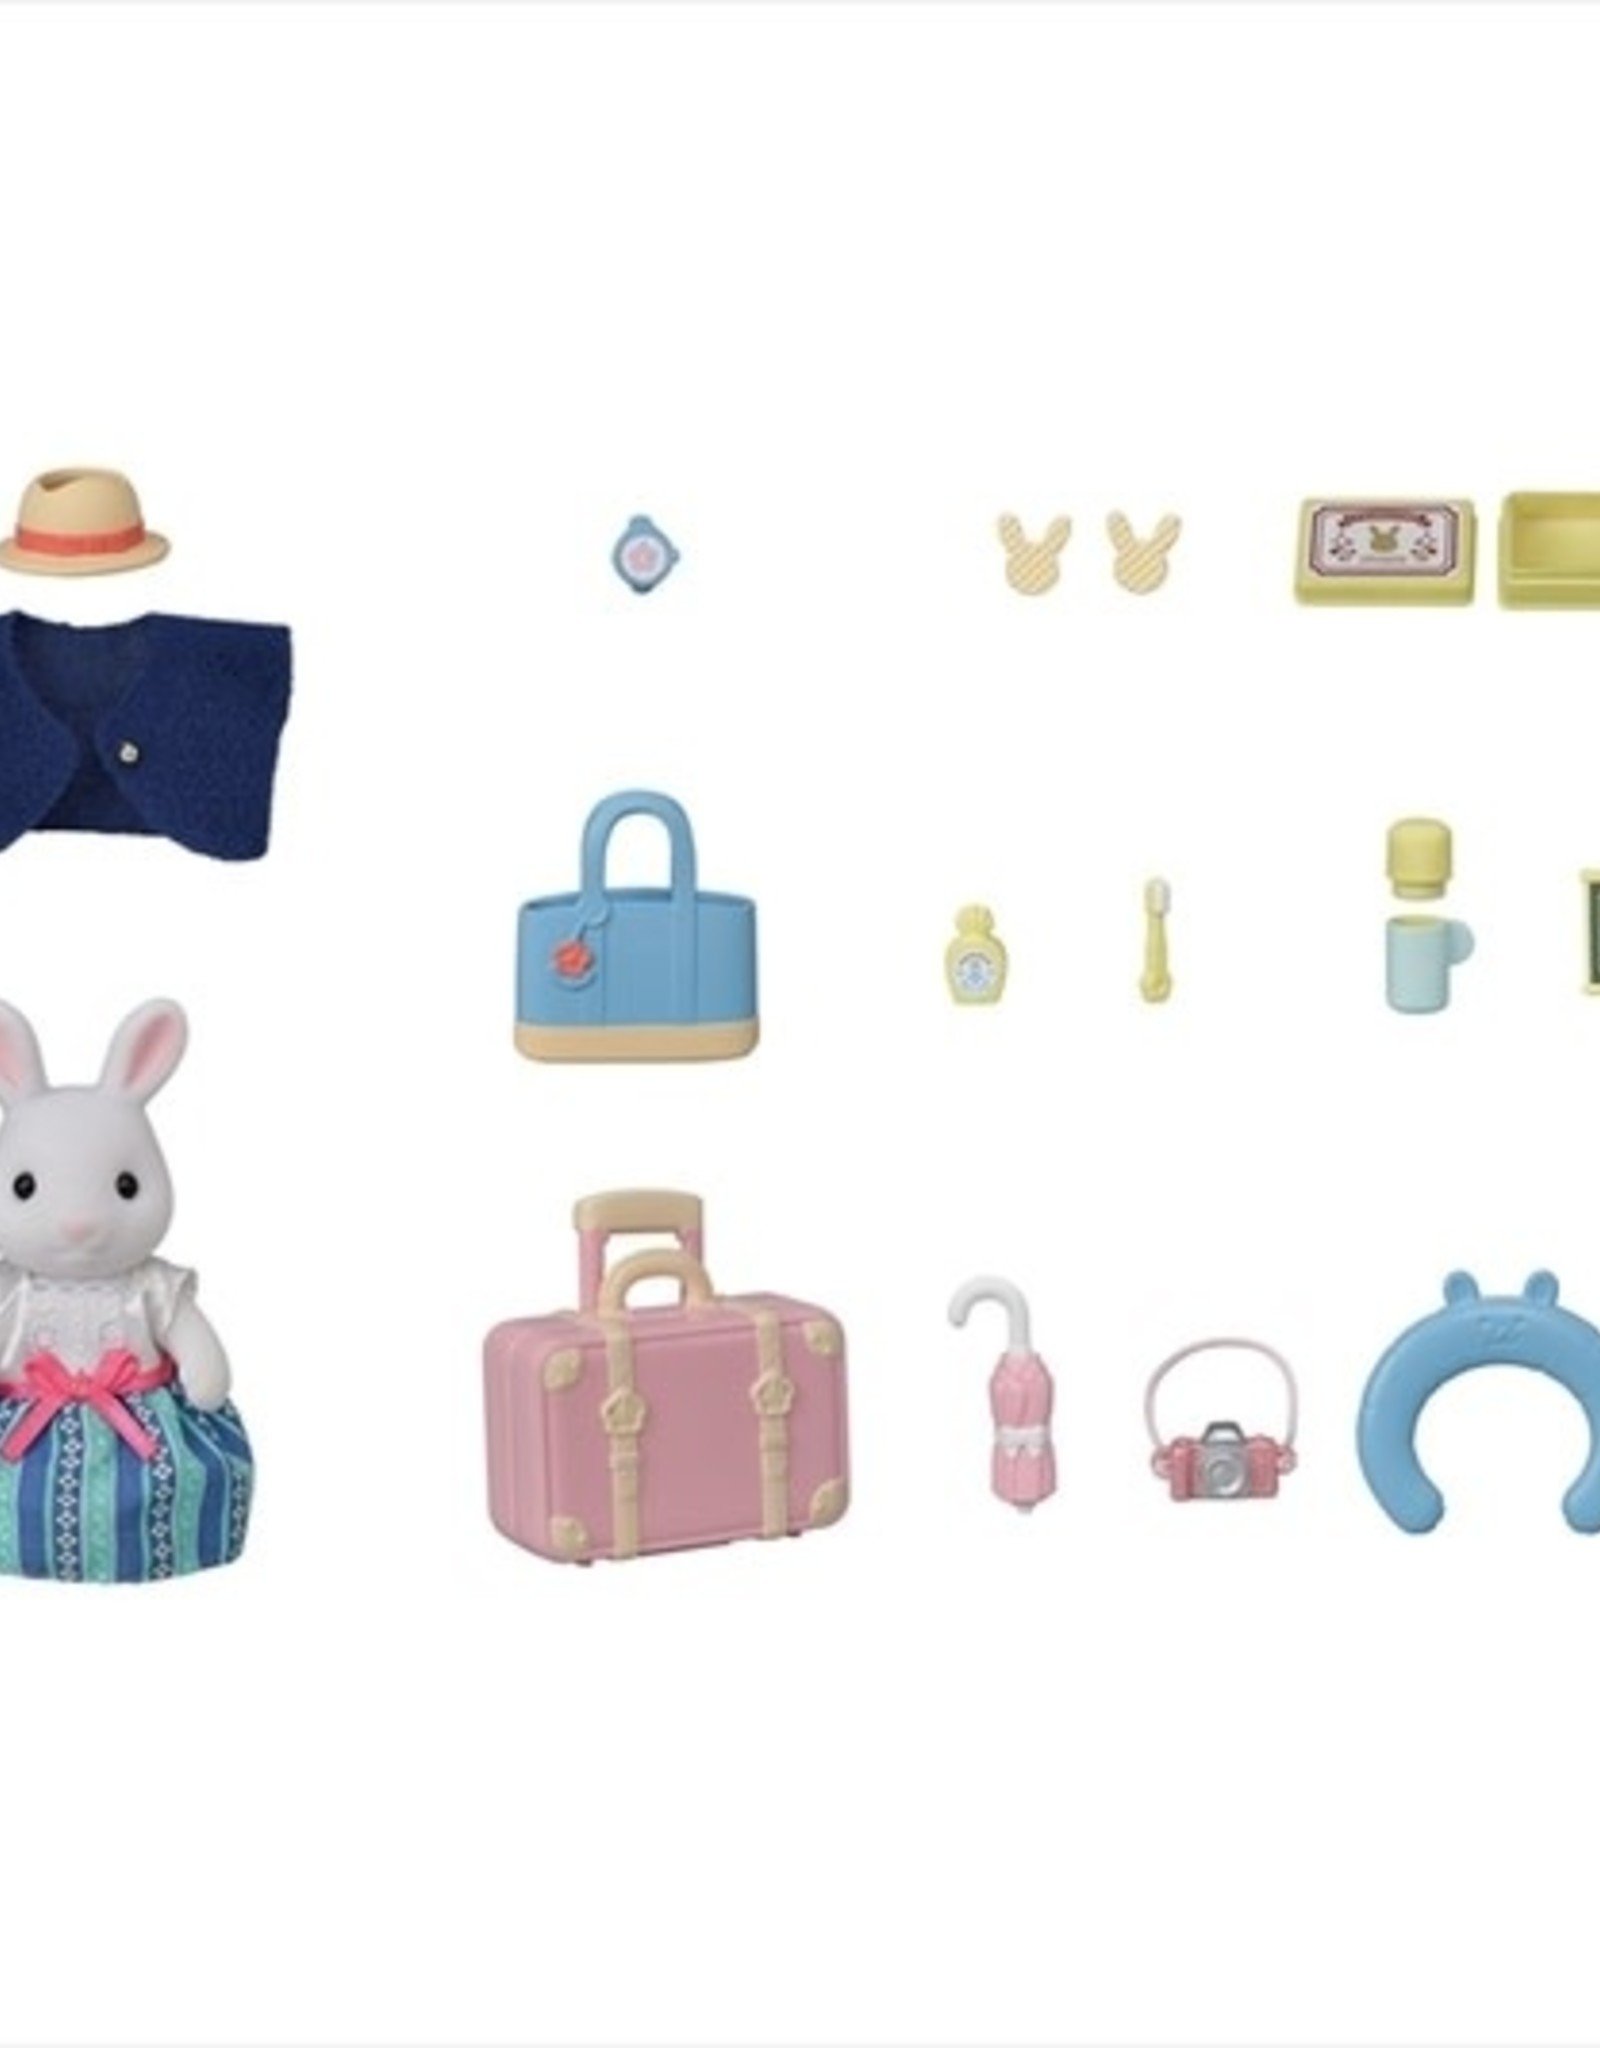 Calico Critters CC Weekend Travel Set - Snow Rabbit Mother